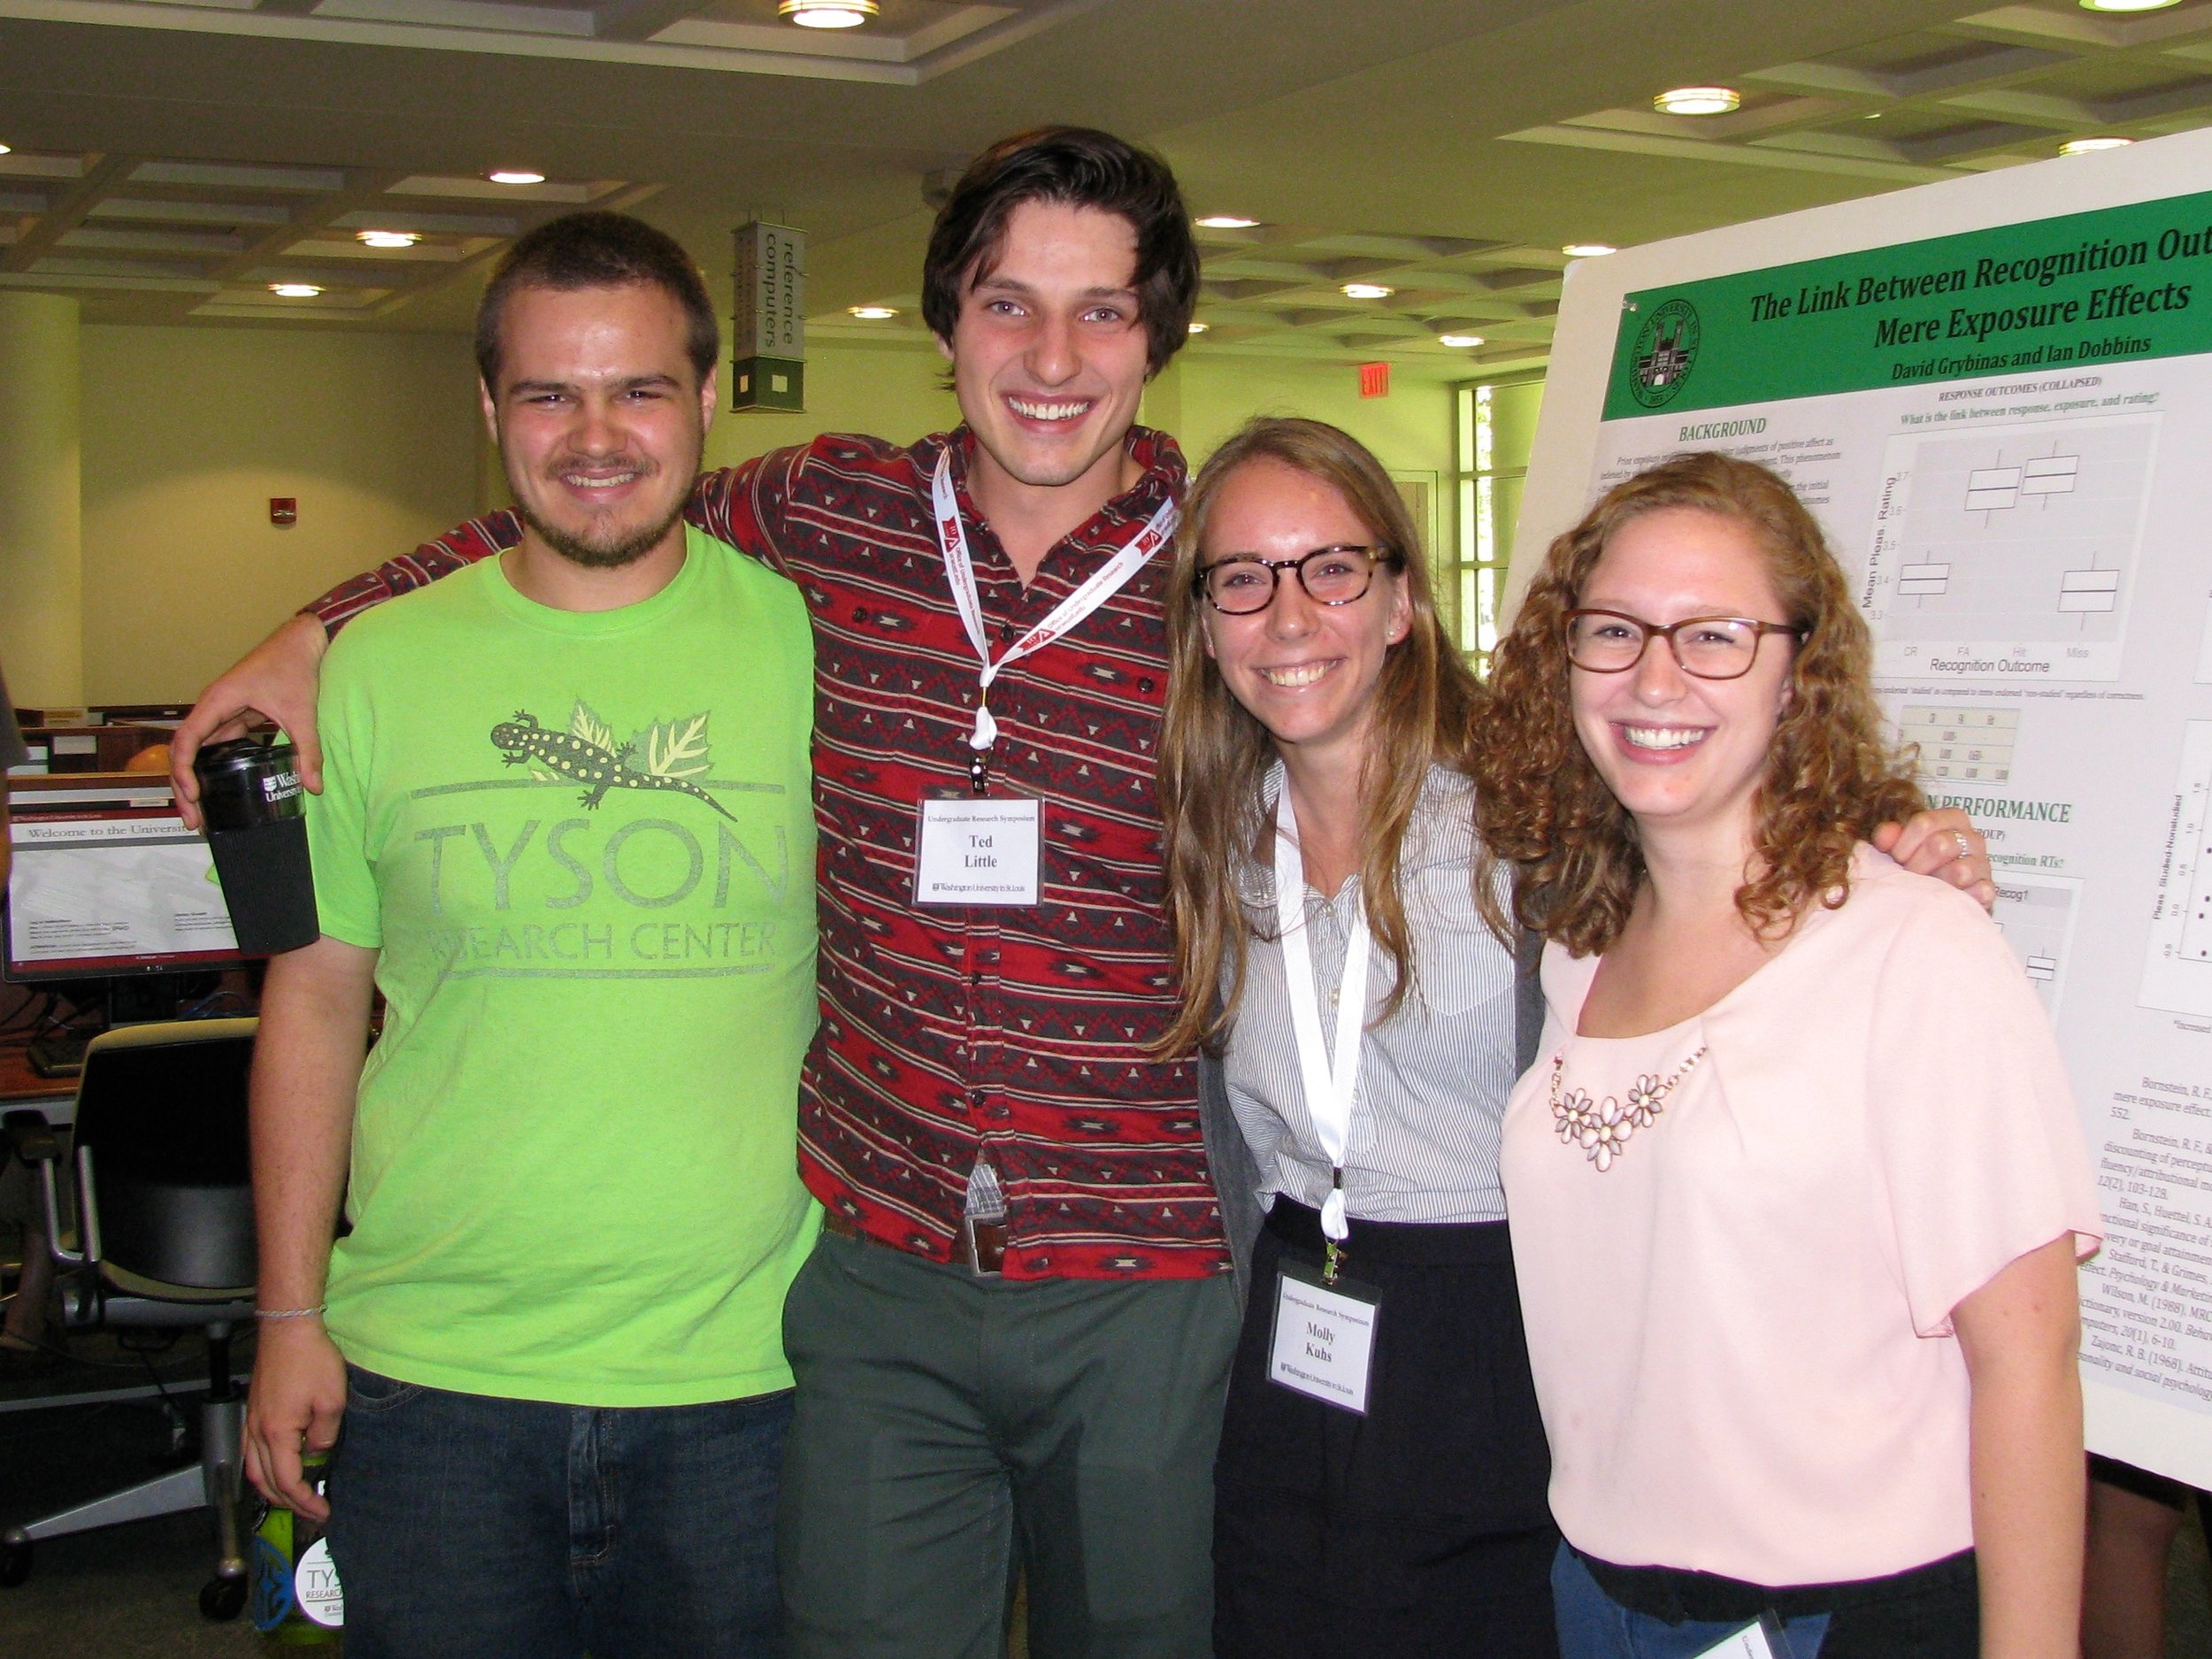  Tyson undergraduate fellows supporting their peers at the WashU Undergraduate Research Symposium in October 2015 